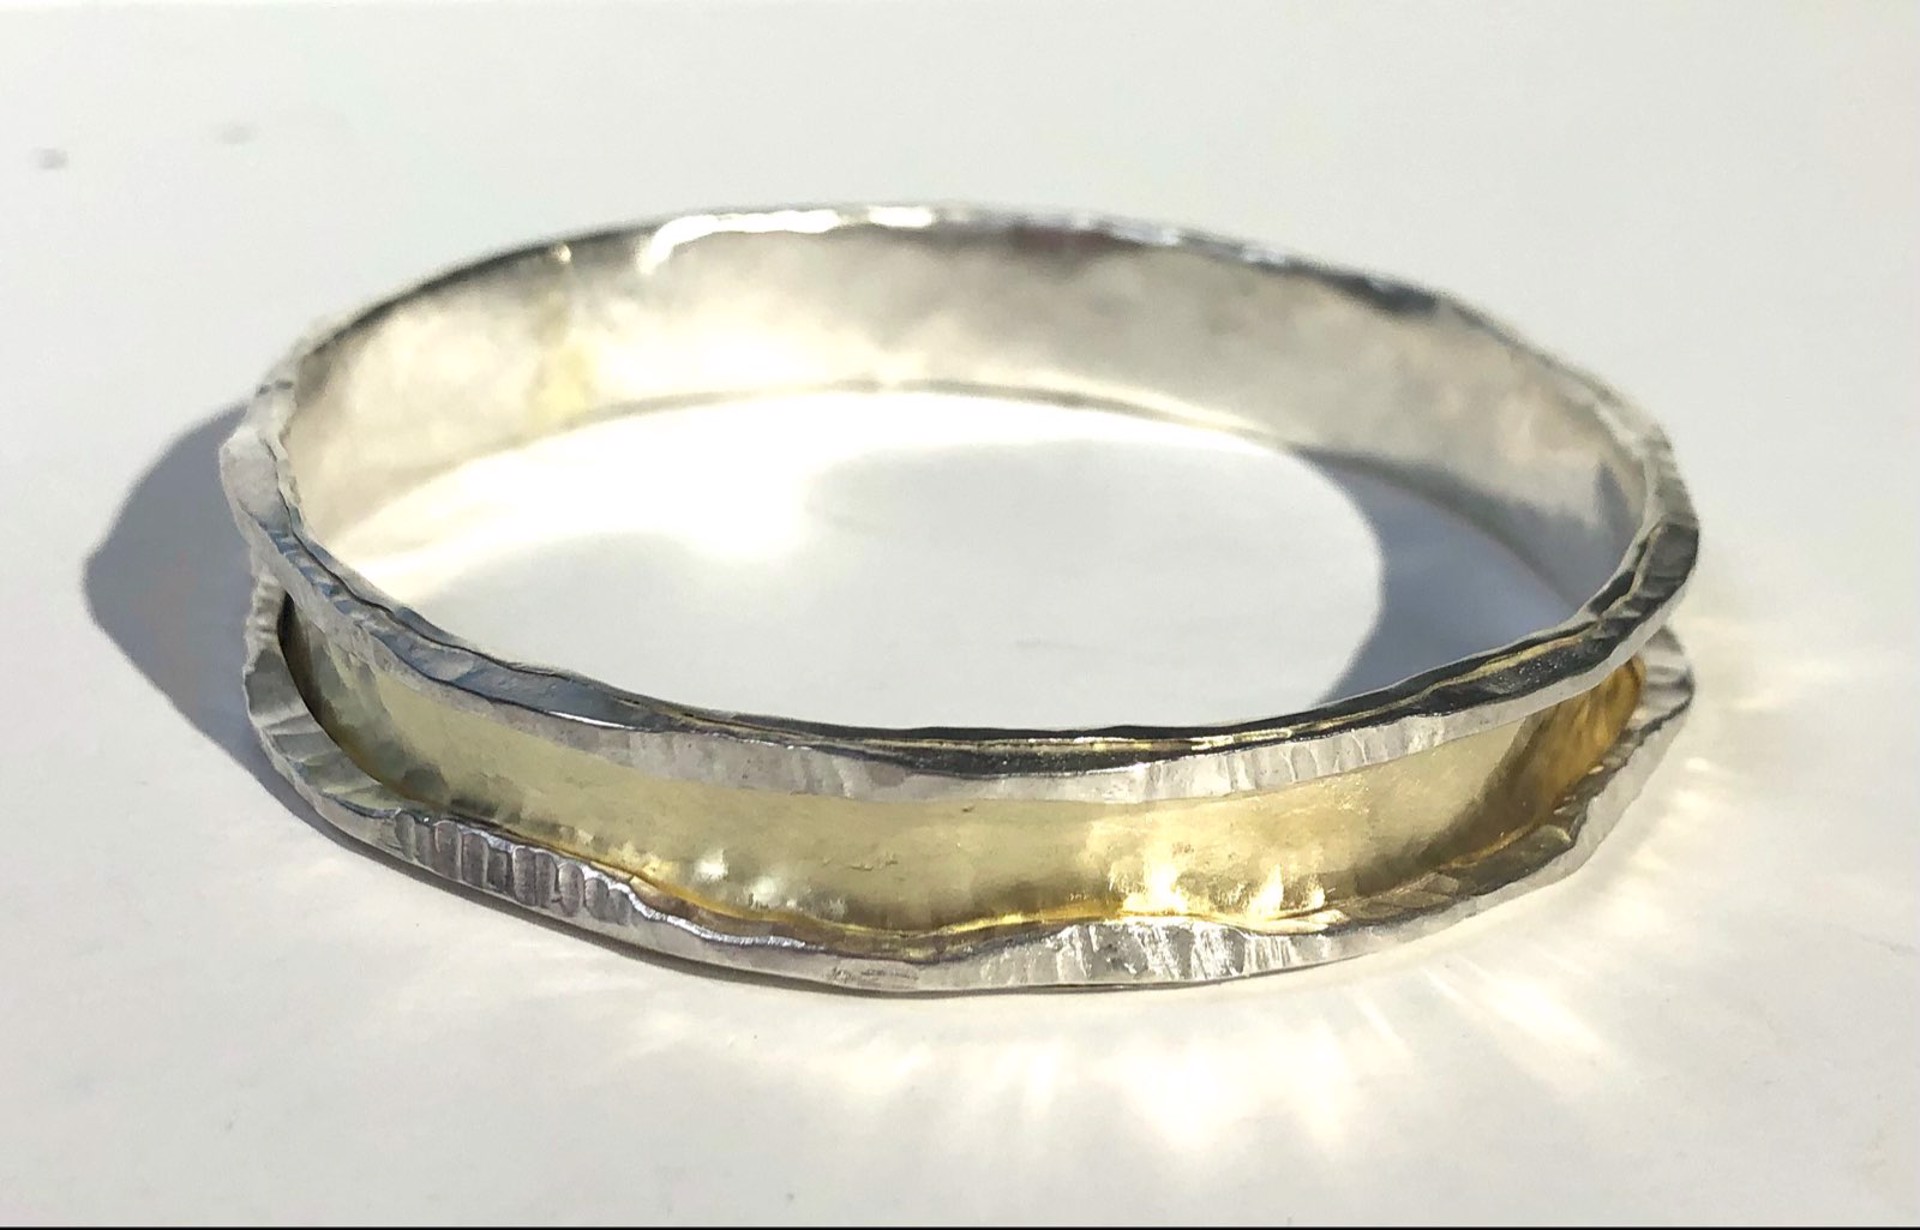 Charming Bangle in Gold Band by Sana Doumet